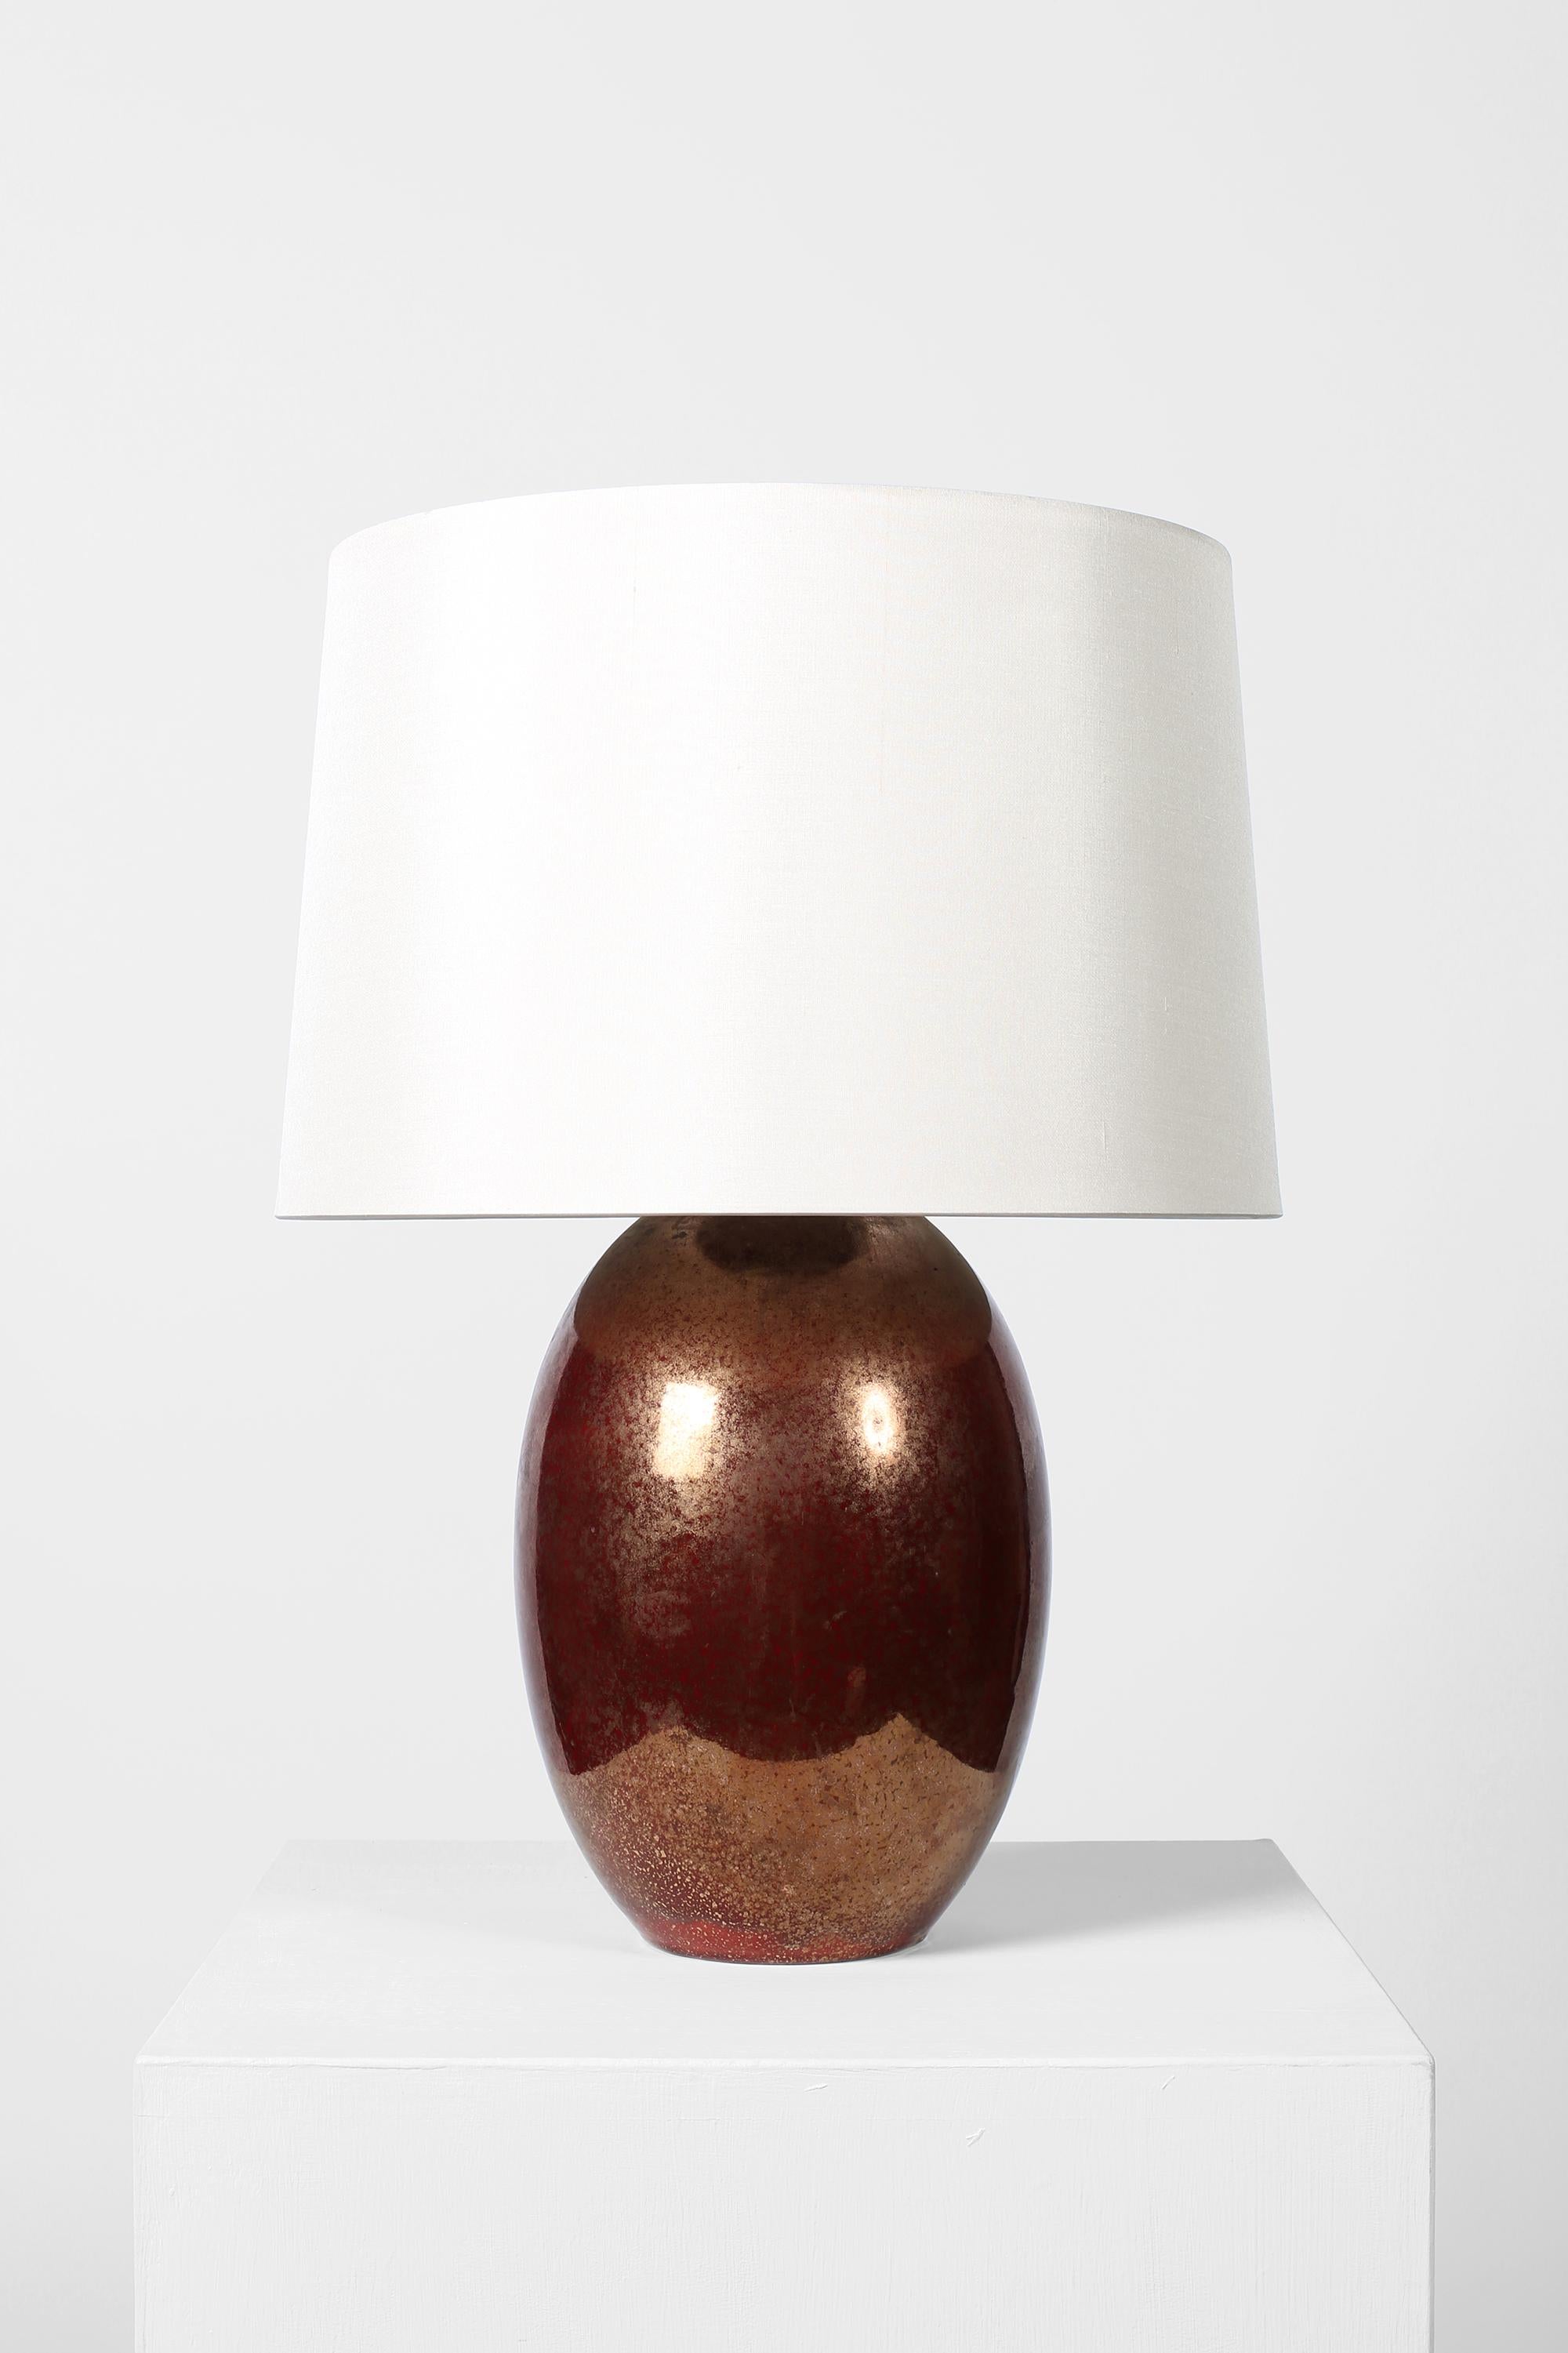 A large Art Deco ovoid ceramic table lamp with deep sanguine and speckled gold metallic glaze, in the manner of Jean Besnard (1889-1958). Indistinctly signed with the monogram JB. French, c. 1930. Supplied with an off-white dupion silk